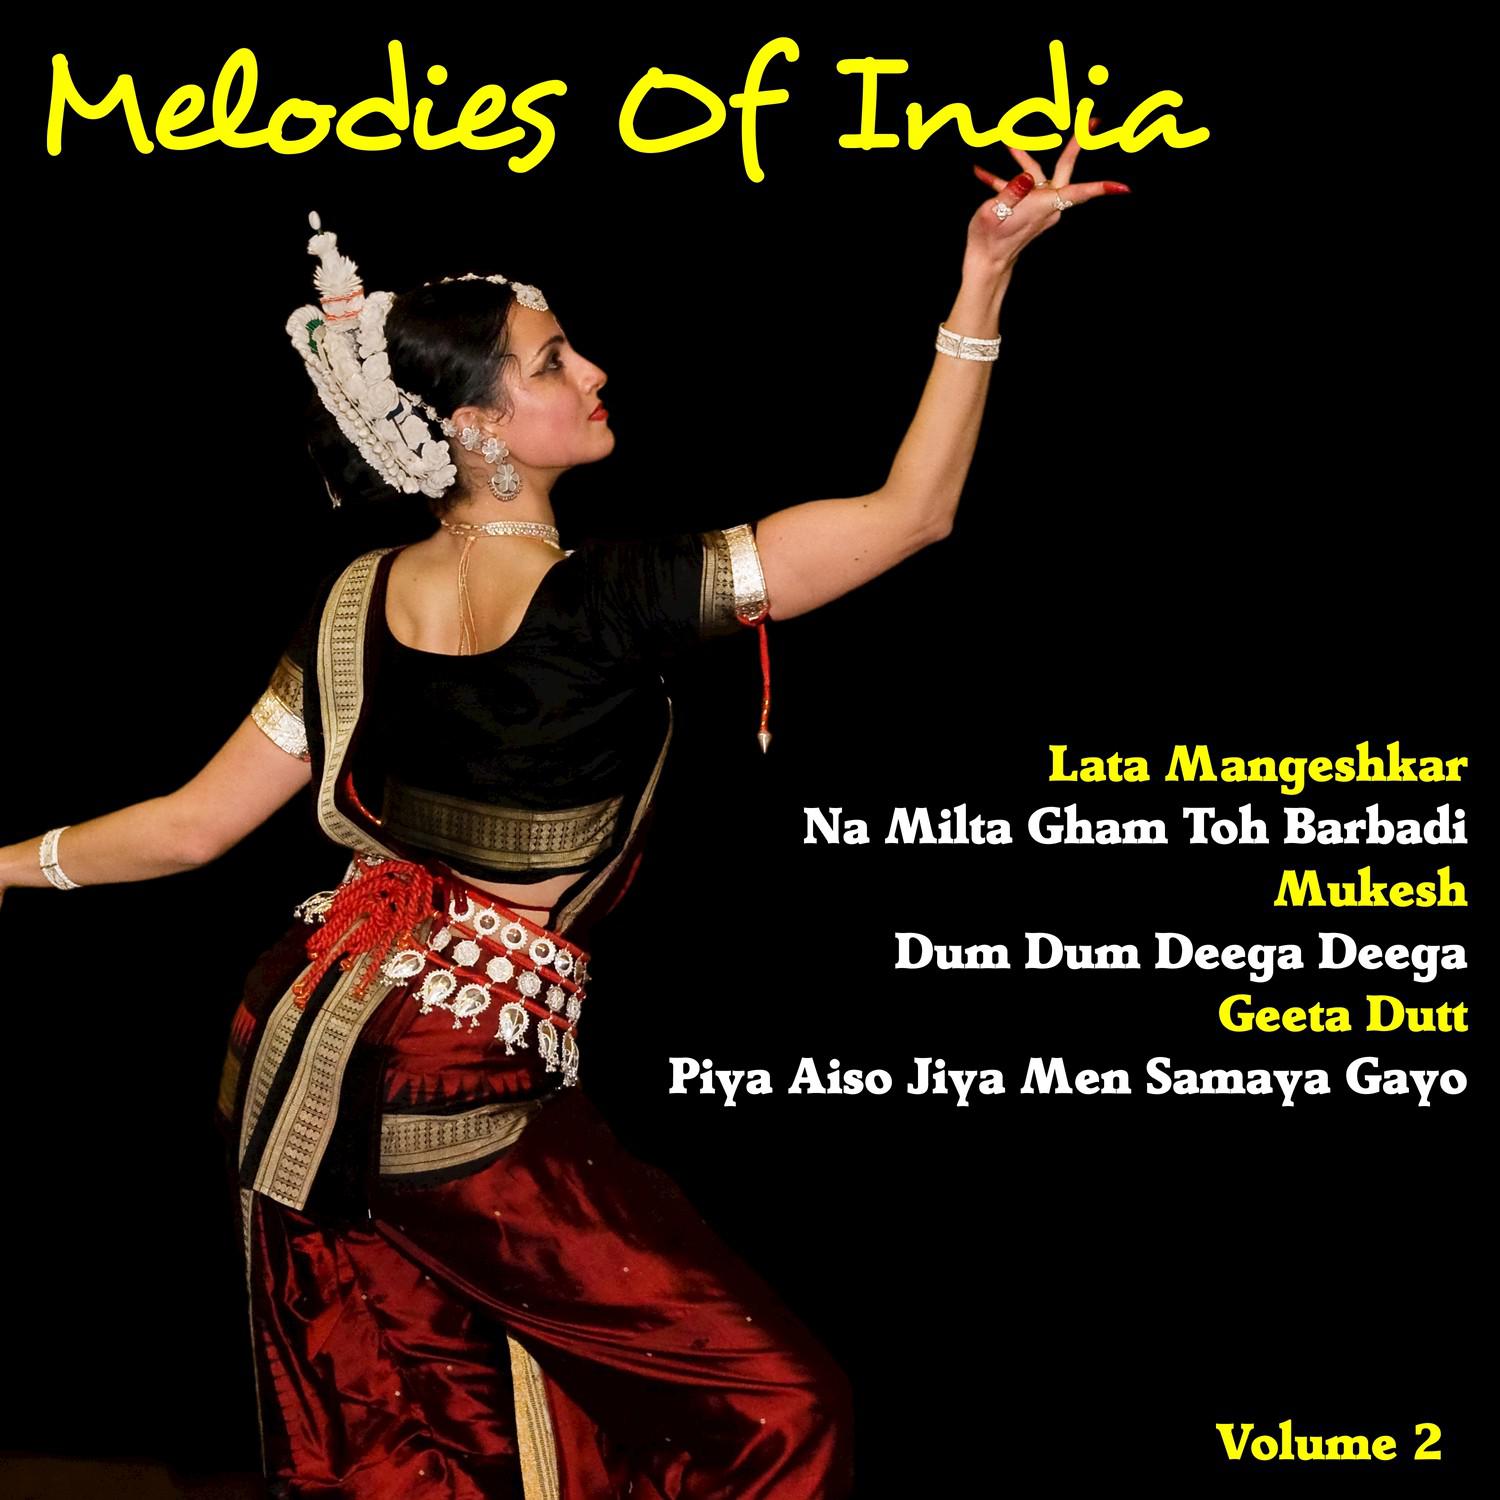 Melodies of India, Vol. 2